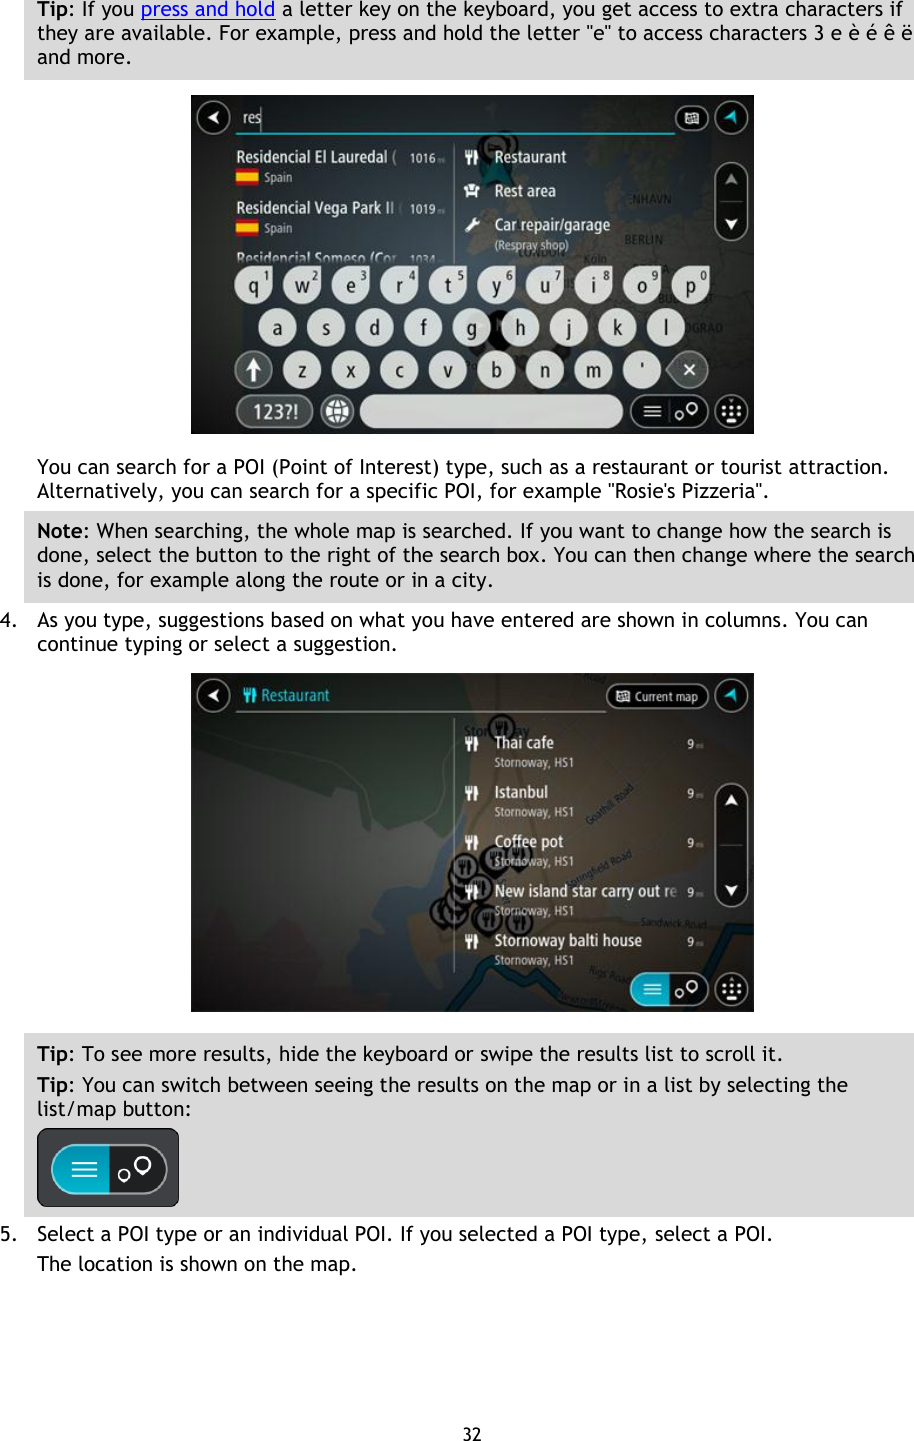 32    Tip: If you press and hold a letter key on the keyboard, you get access to extra characters if they are available. For example, press and hold the letter &quot;e&quot; to access characters 3 e è é ê ë and more.  You can search for a POI (Point of Interest) type, such as a restaurant or tourist attraction. Alternatively, you can search for a specific POI, for example &quot;Rosie&apos;s Pizzeria&quot;. Note: When searching, the whole map is searched. If you want to change how the search is done, select the button to the right of the search box. You can then change where the search is done, for example along the route or in a city. 4. As you type, suggestions based on what you have entered are shown in columns. You can continue typing or select a suggestion.  Tip: To see more results, hide the keyboard or swipe the results list to scroll it. Tip: You can switch between seeing the results on the map or in a list by selecting the list/map button:    5. Select a POI type or an individual POI. If you selected a POI type, select a POI. The location is shown on the map. 